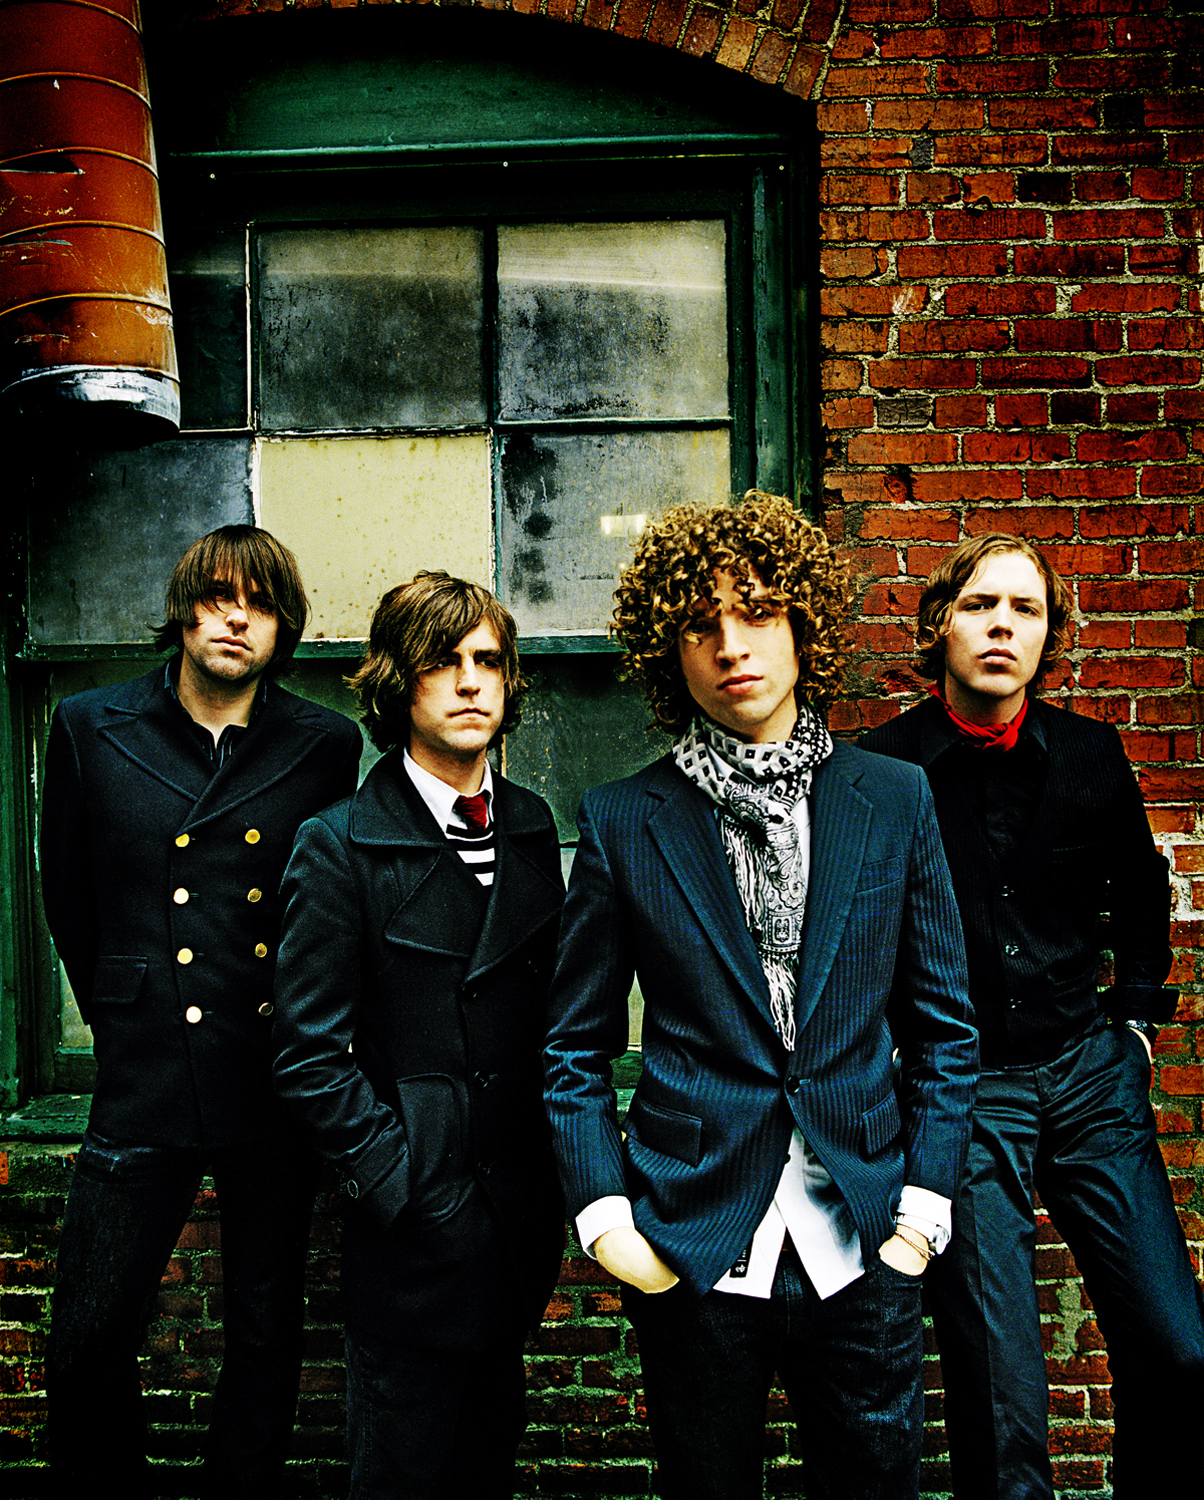 On self-empowerment: 'MOST IMPORTANT IS TO STAY ENTHUSIASTIC, WORKING ON WAYS TO STAY ENTHUSIASTIC IS HOW I STAY EMPOWERED' Steve Bays, vocalist Hot Hot Heat  [photo use by permission of WBR.]